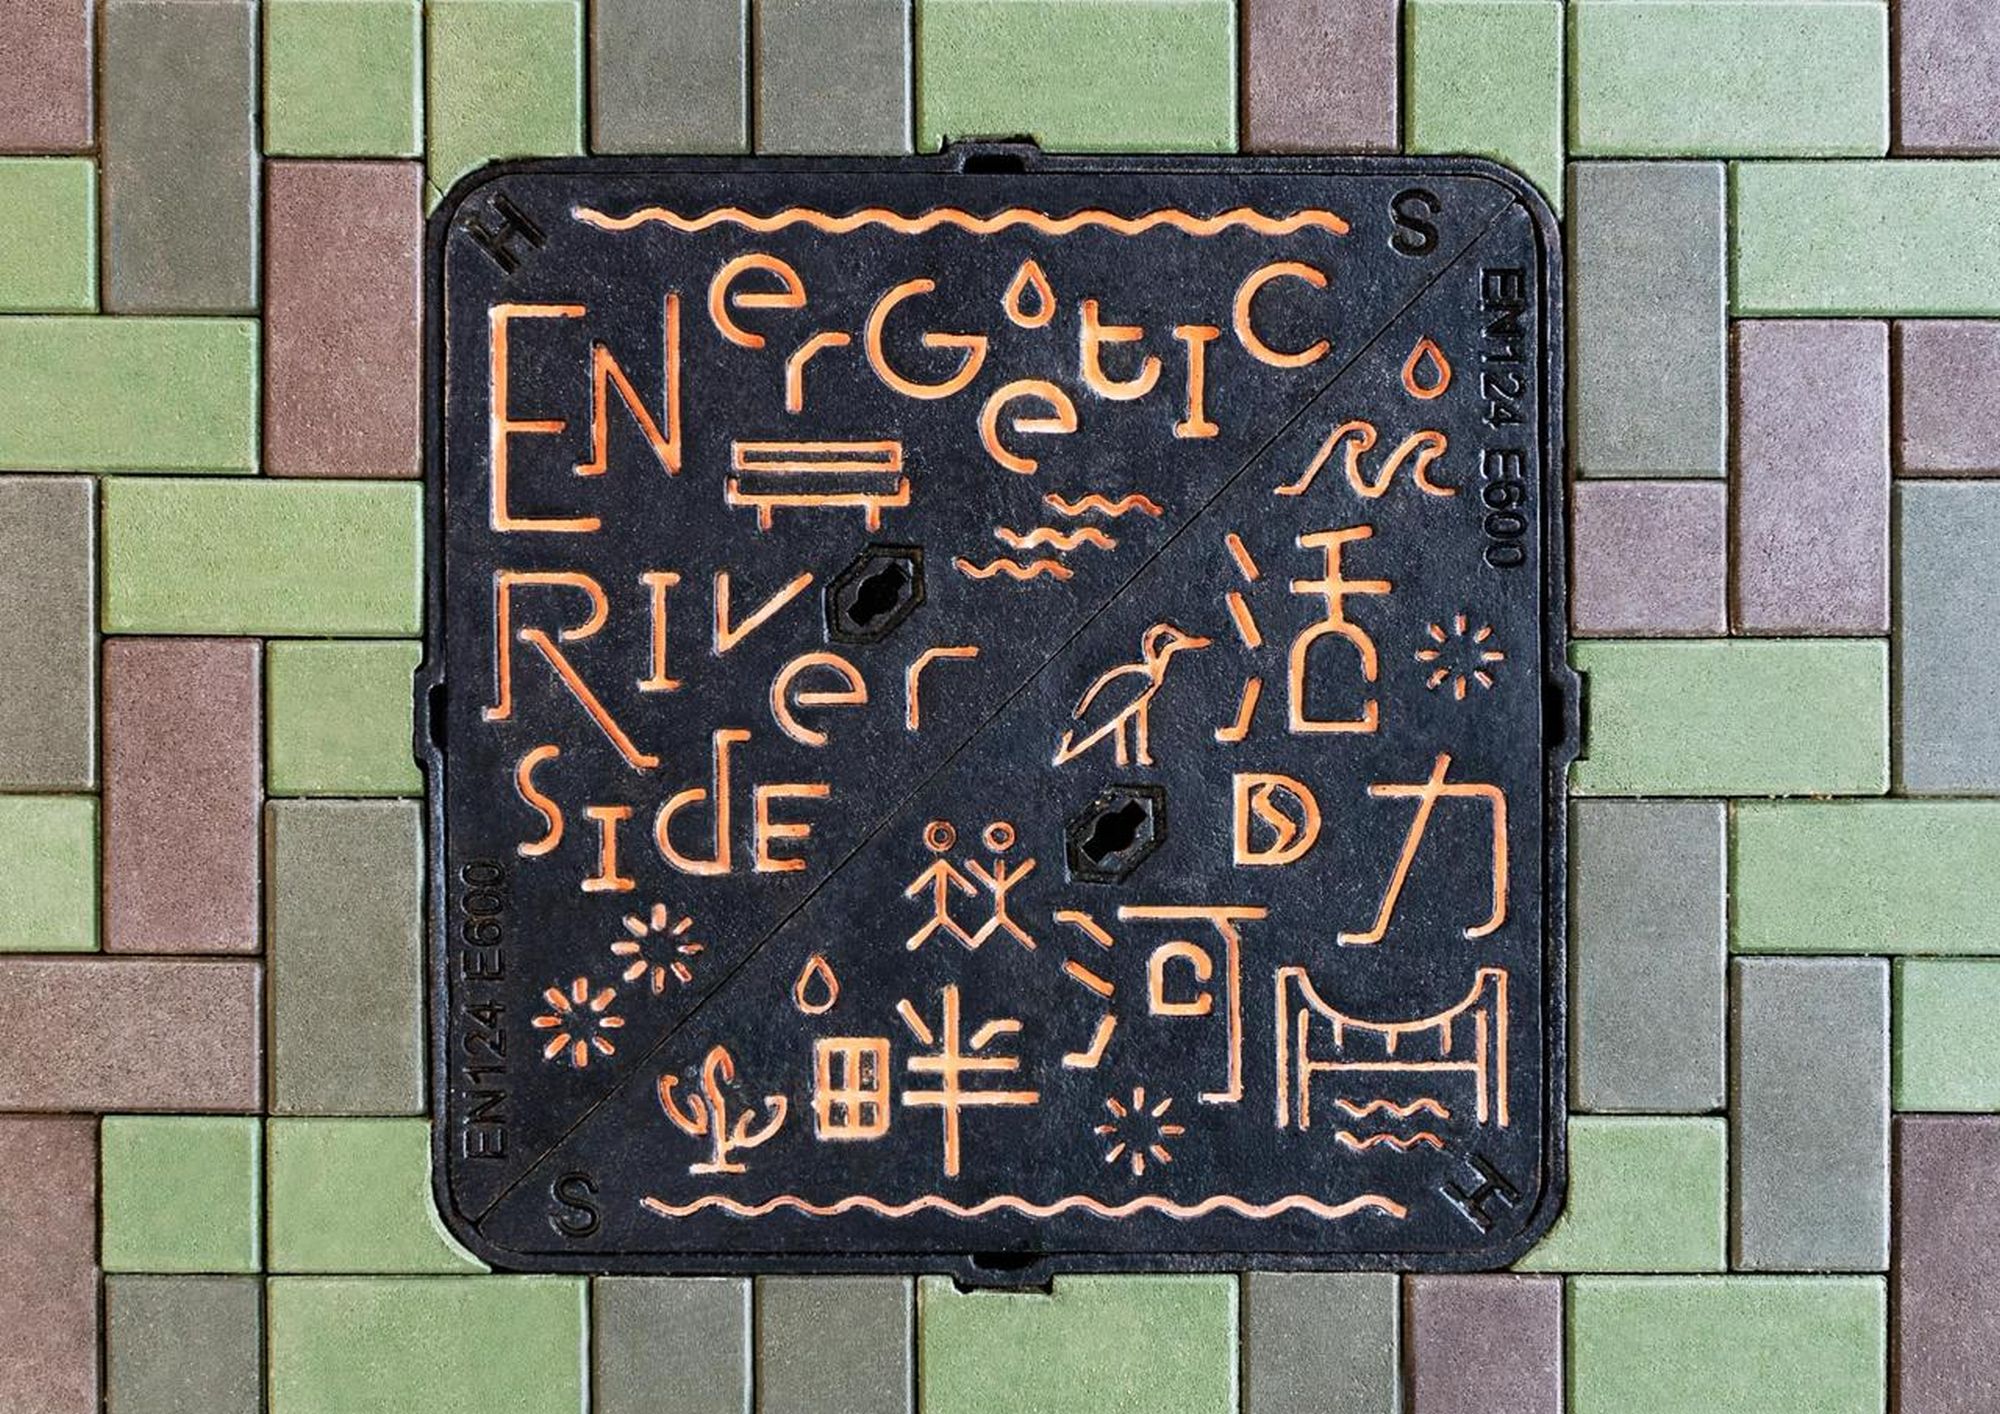 Thematic manhole cover located at Cha Kwo Ling Promenade.